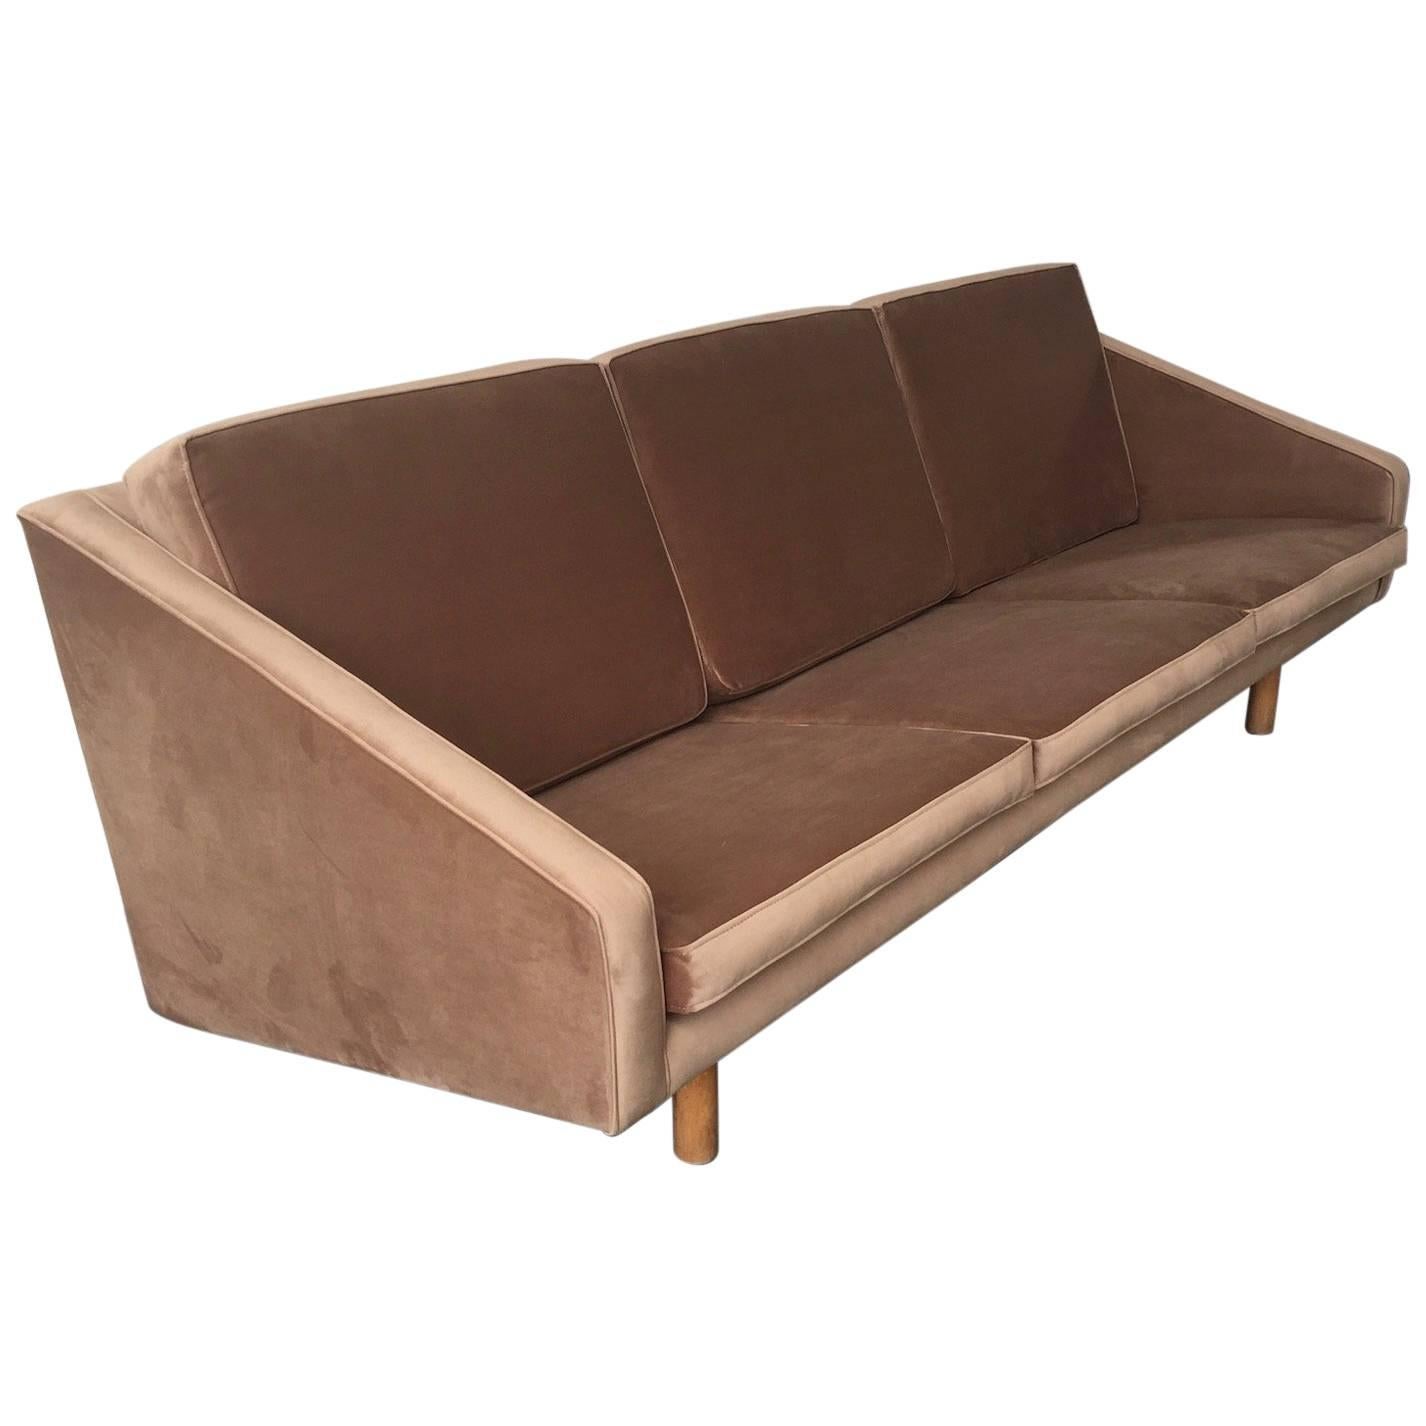 Wonderful Italian Sofa Attributed to Gio Ponti and Completely Re-Upholstered